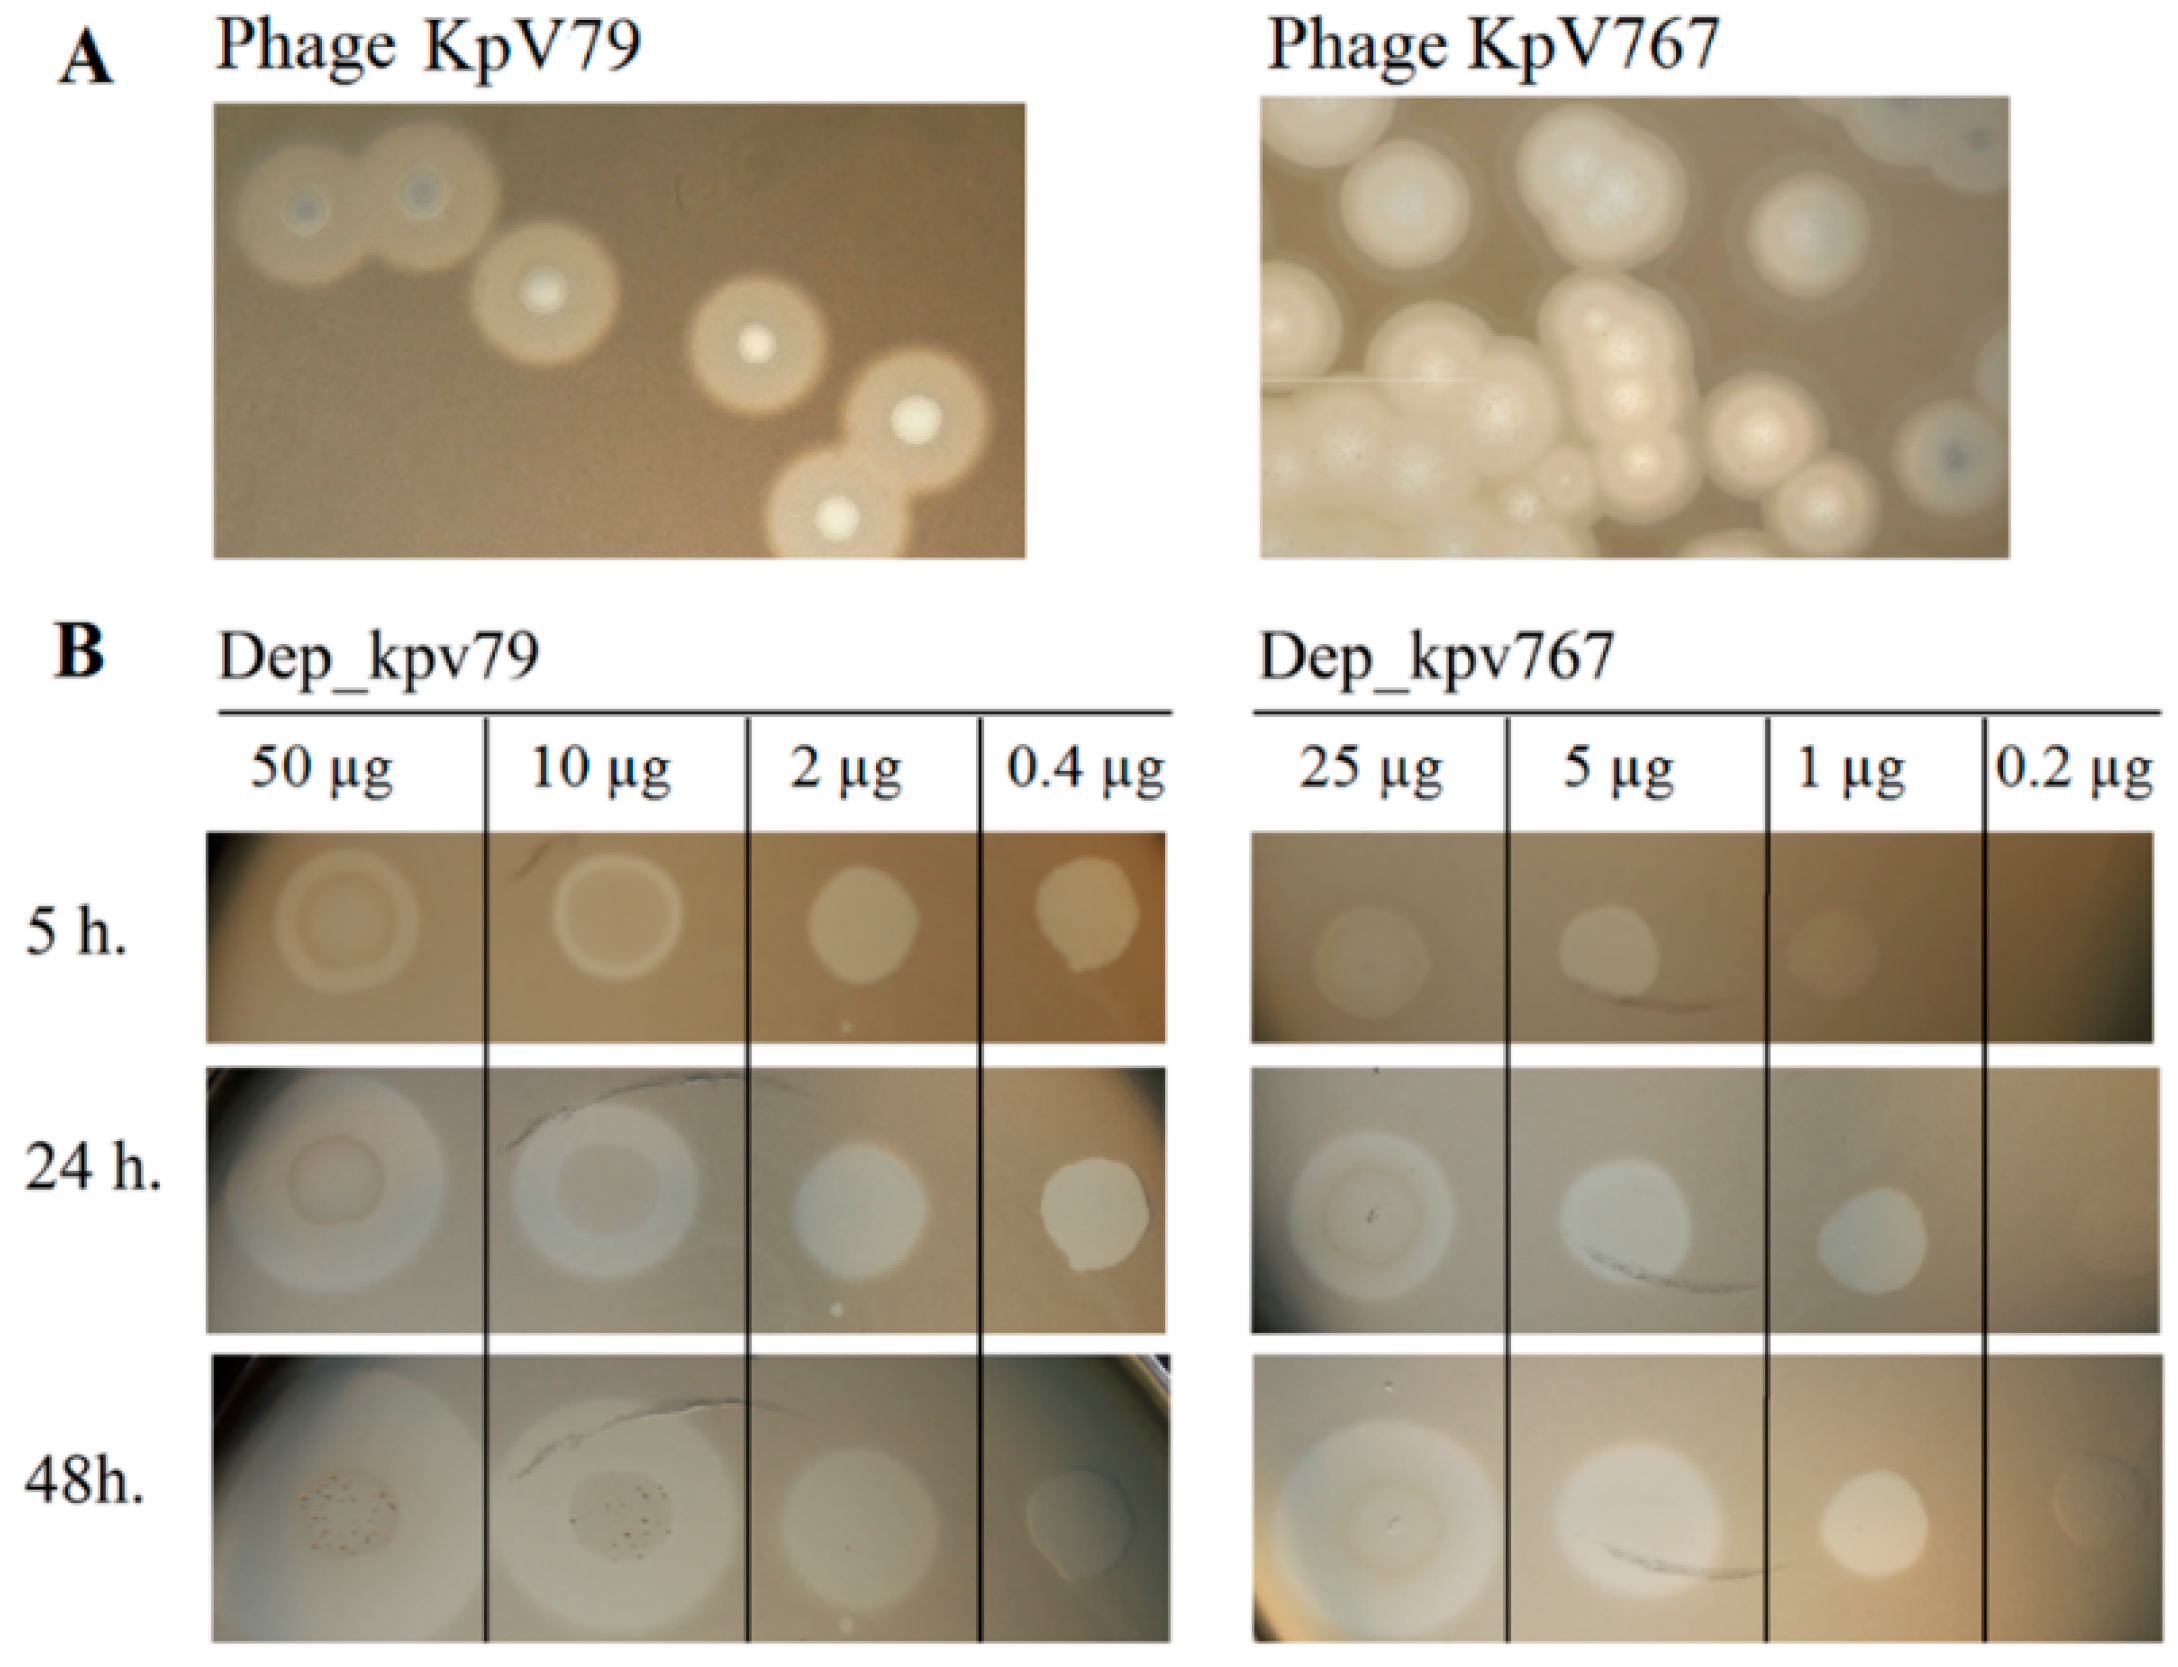 Antibiotics | Free Full-Text | Characterization and Therapeutic Potential  of Bacteriophage-Encoded Polysaccharide Depolymerases with β Galactosidase  Activity against Klebsiella pneumoniae K57 Capsular Type